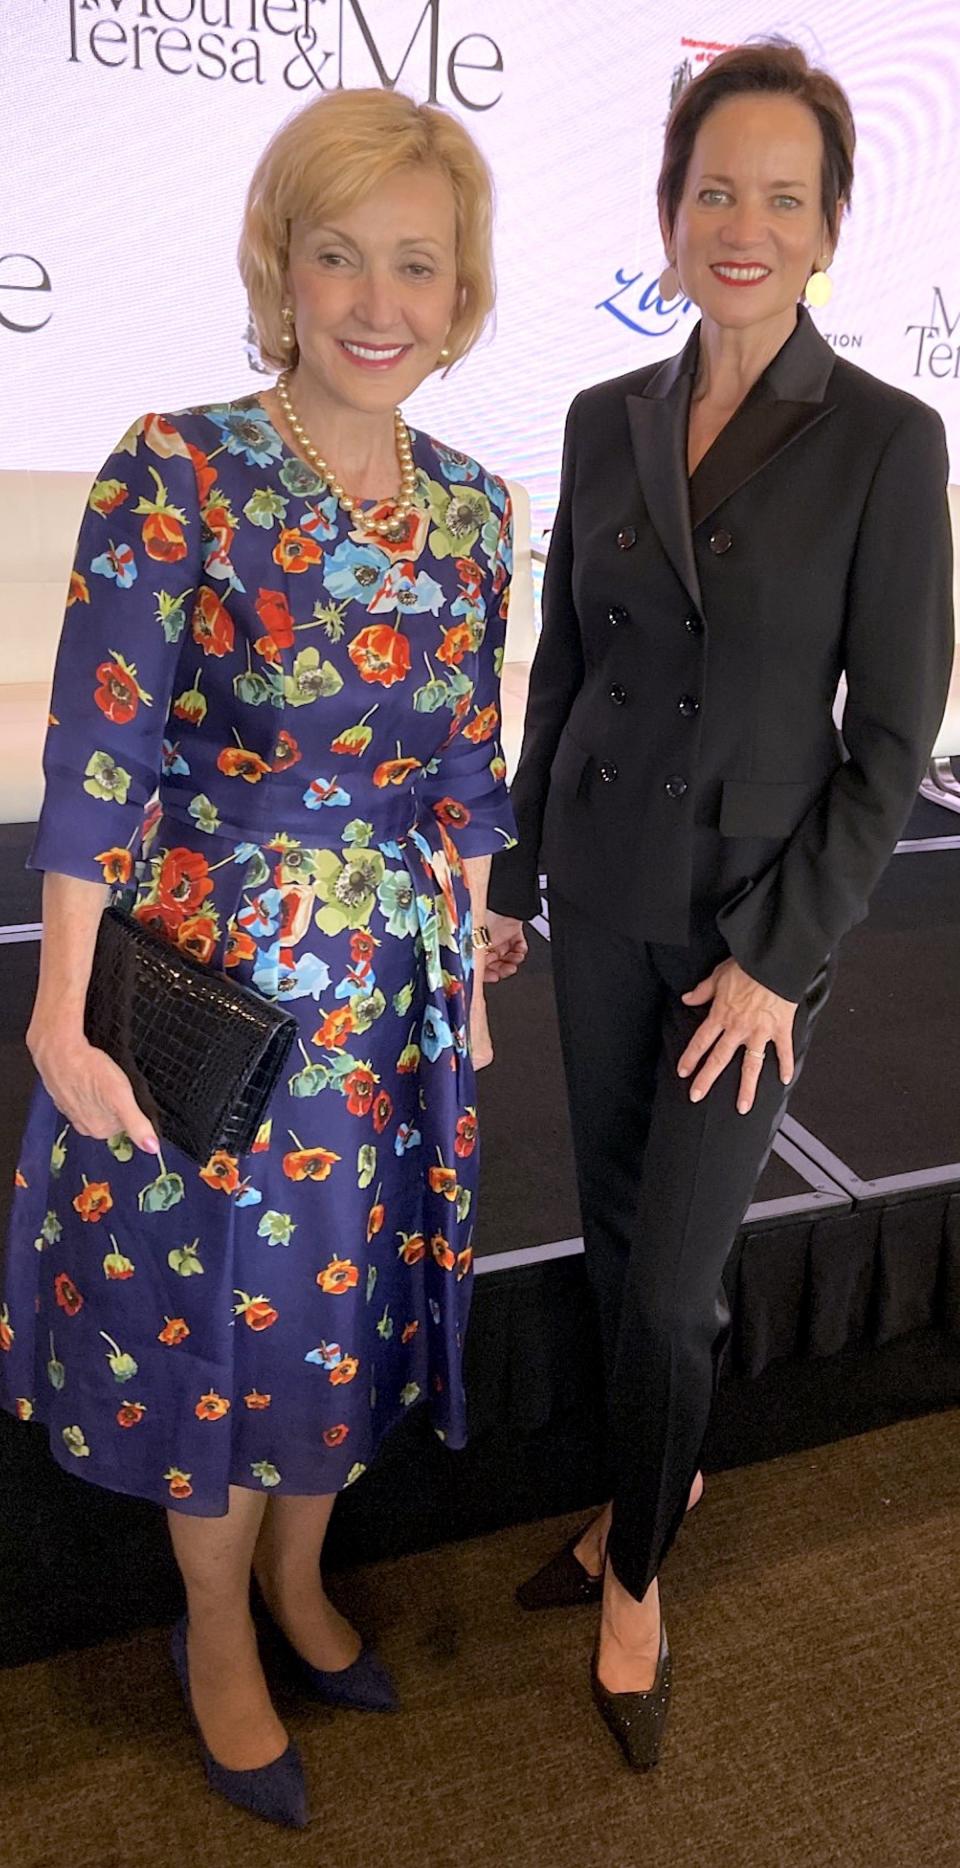 Former U.S.  Ambassador to South Africa Lana Marks at the United Nations International Day of Charity with Swiss actress Jacqueline Fritschi-Cornaz, who portrays Mother Teresa in the recently released film "Mother Teresa and Me."